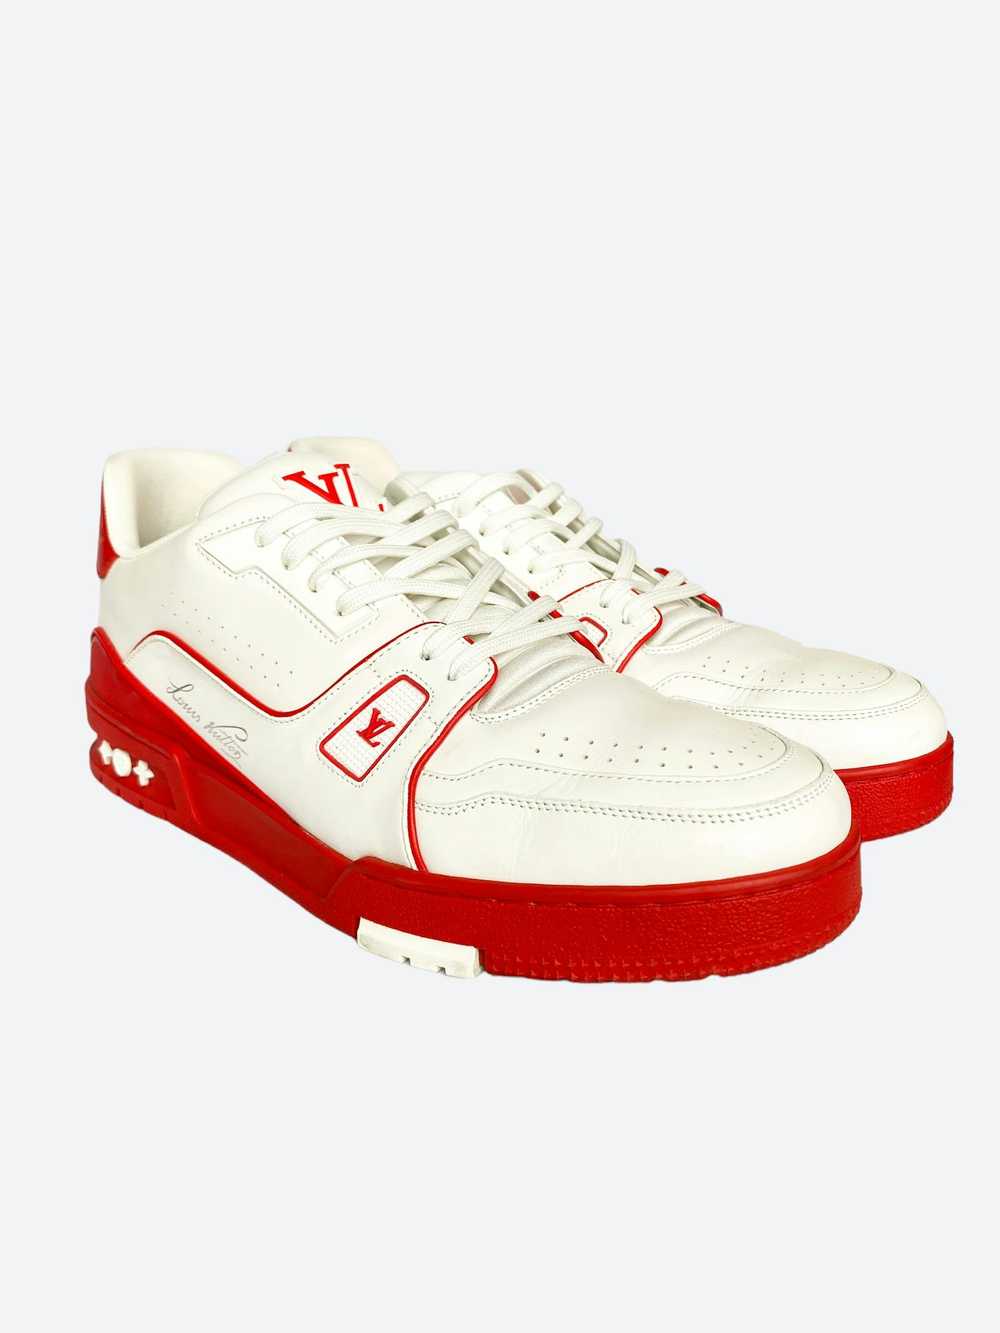 Louis Vuitton Louis Vuitton White & Red Trainers - image 1